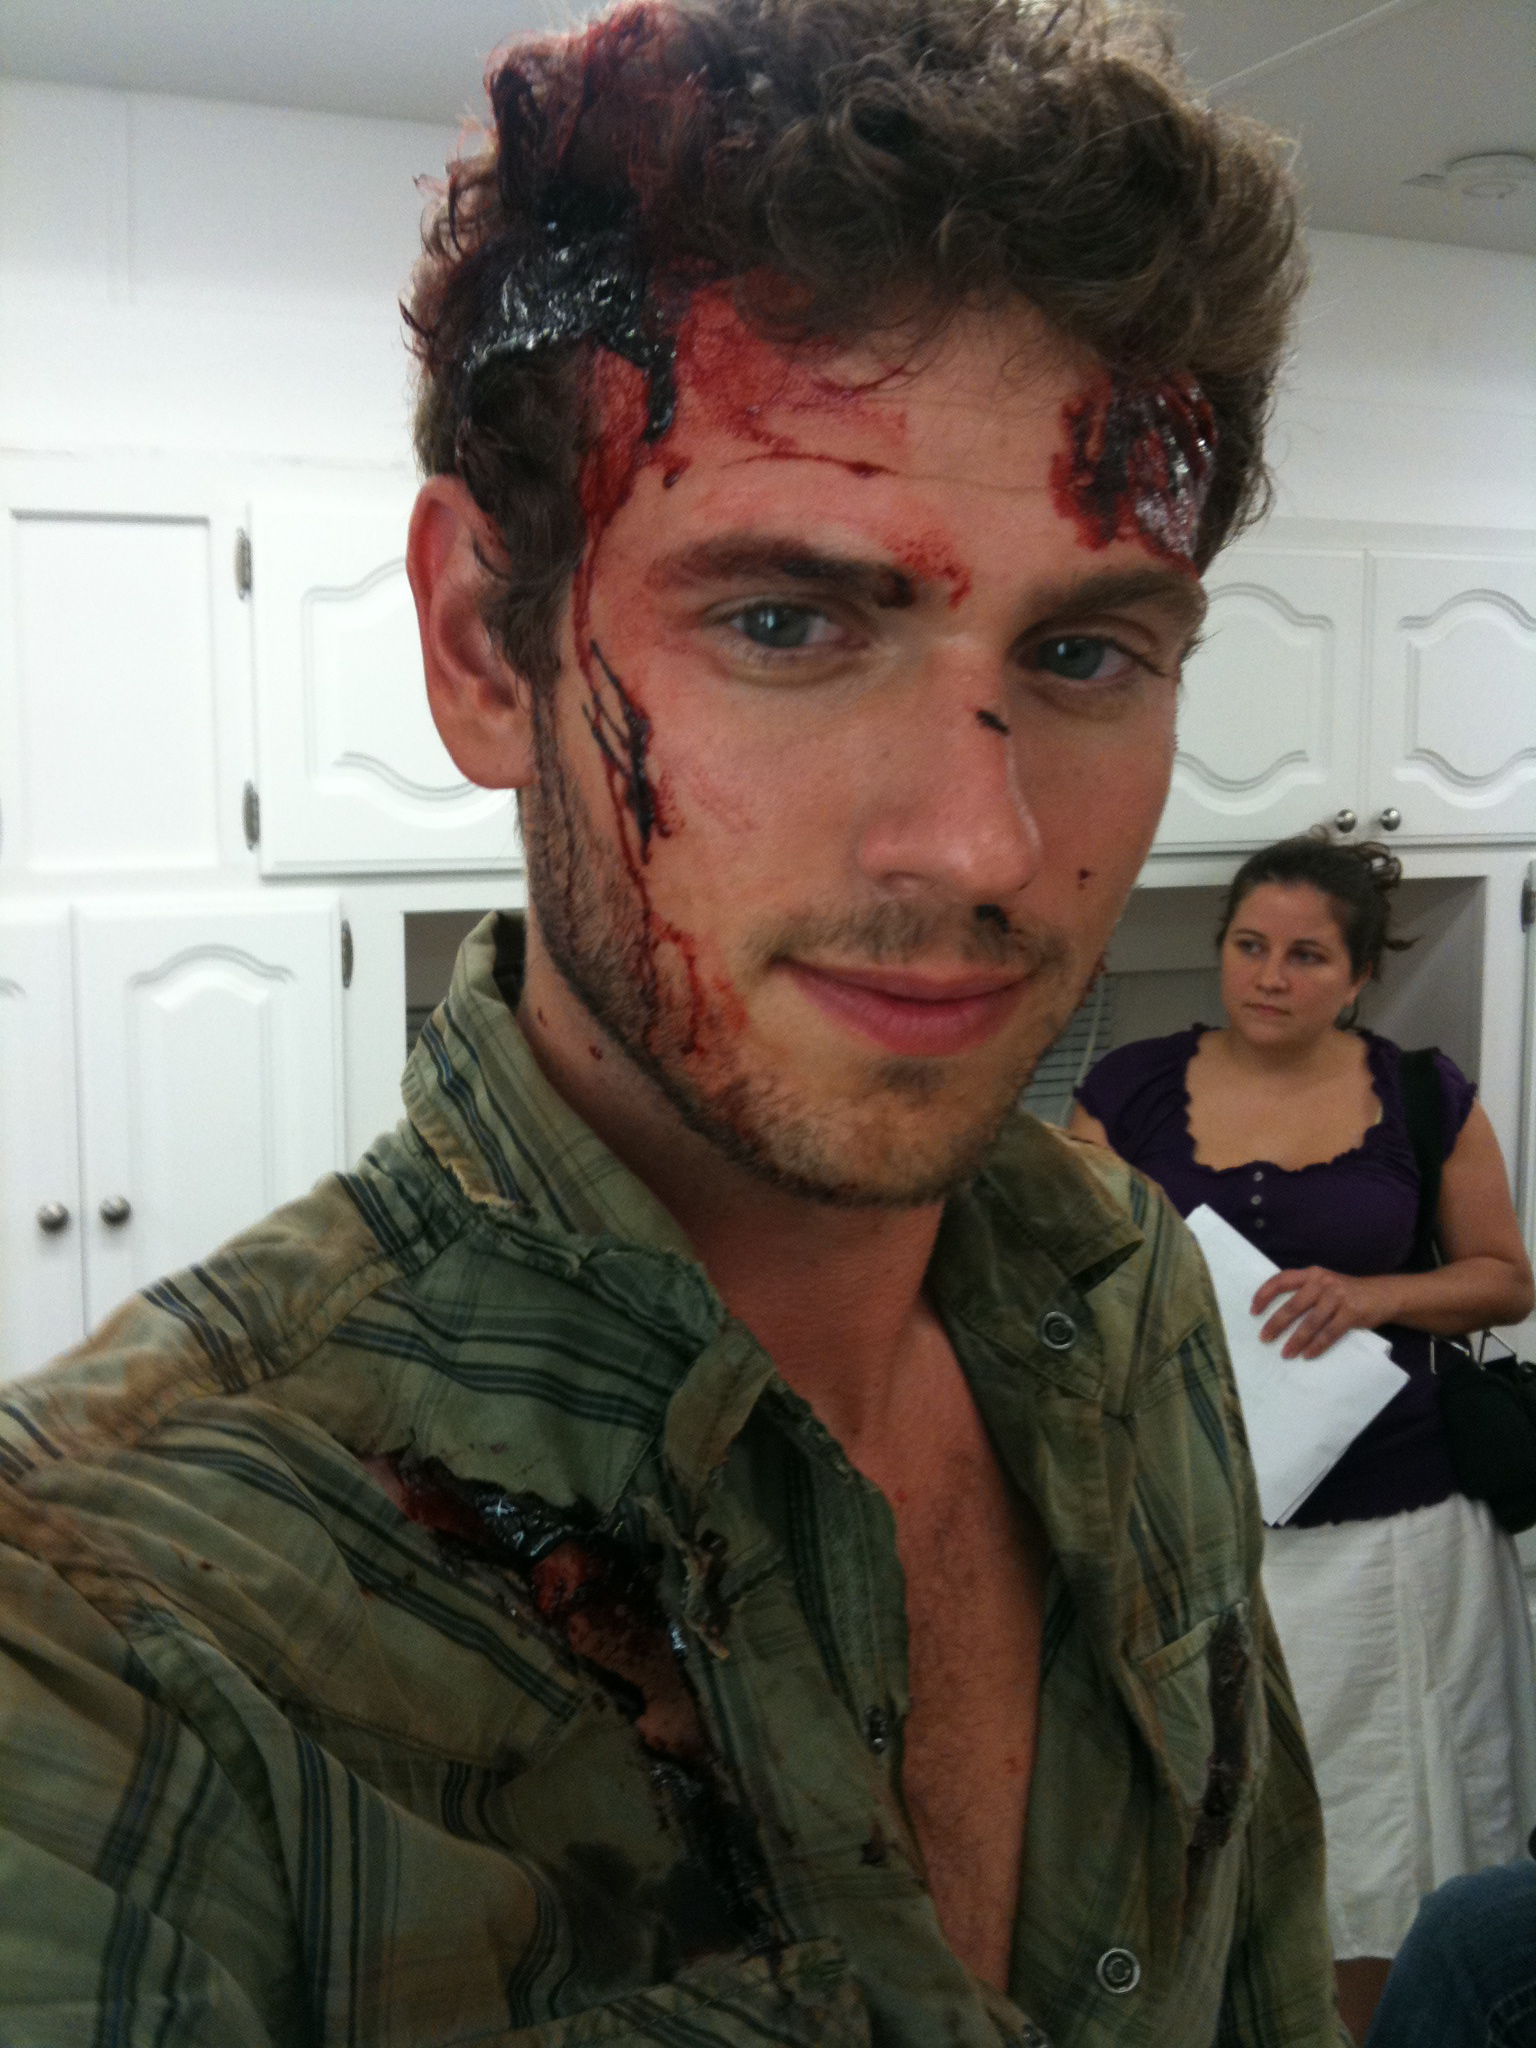 Special Effects makeup by Carlos Savant for the film MOTHMAN. Connor Fox